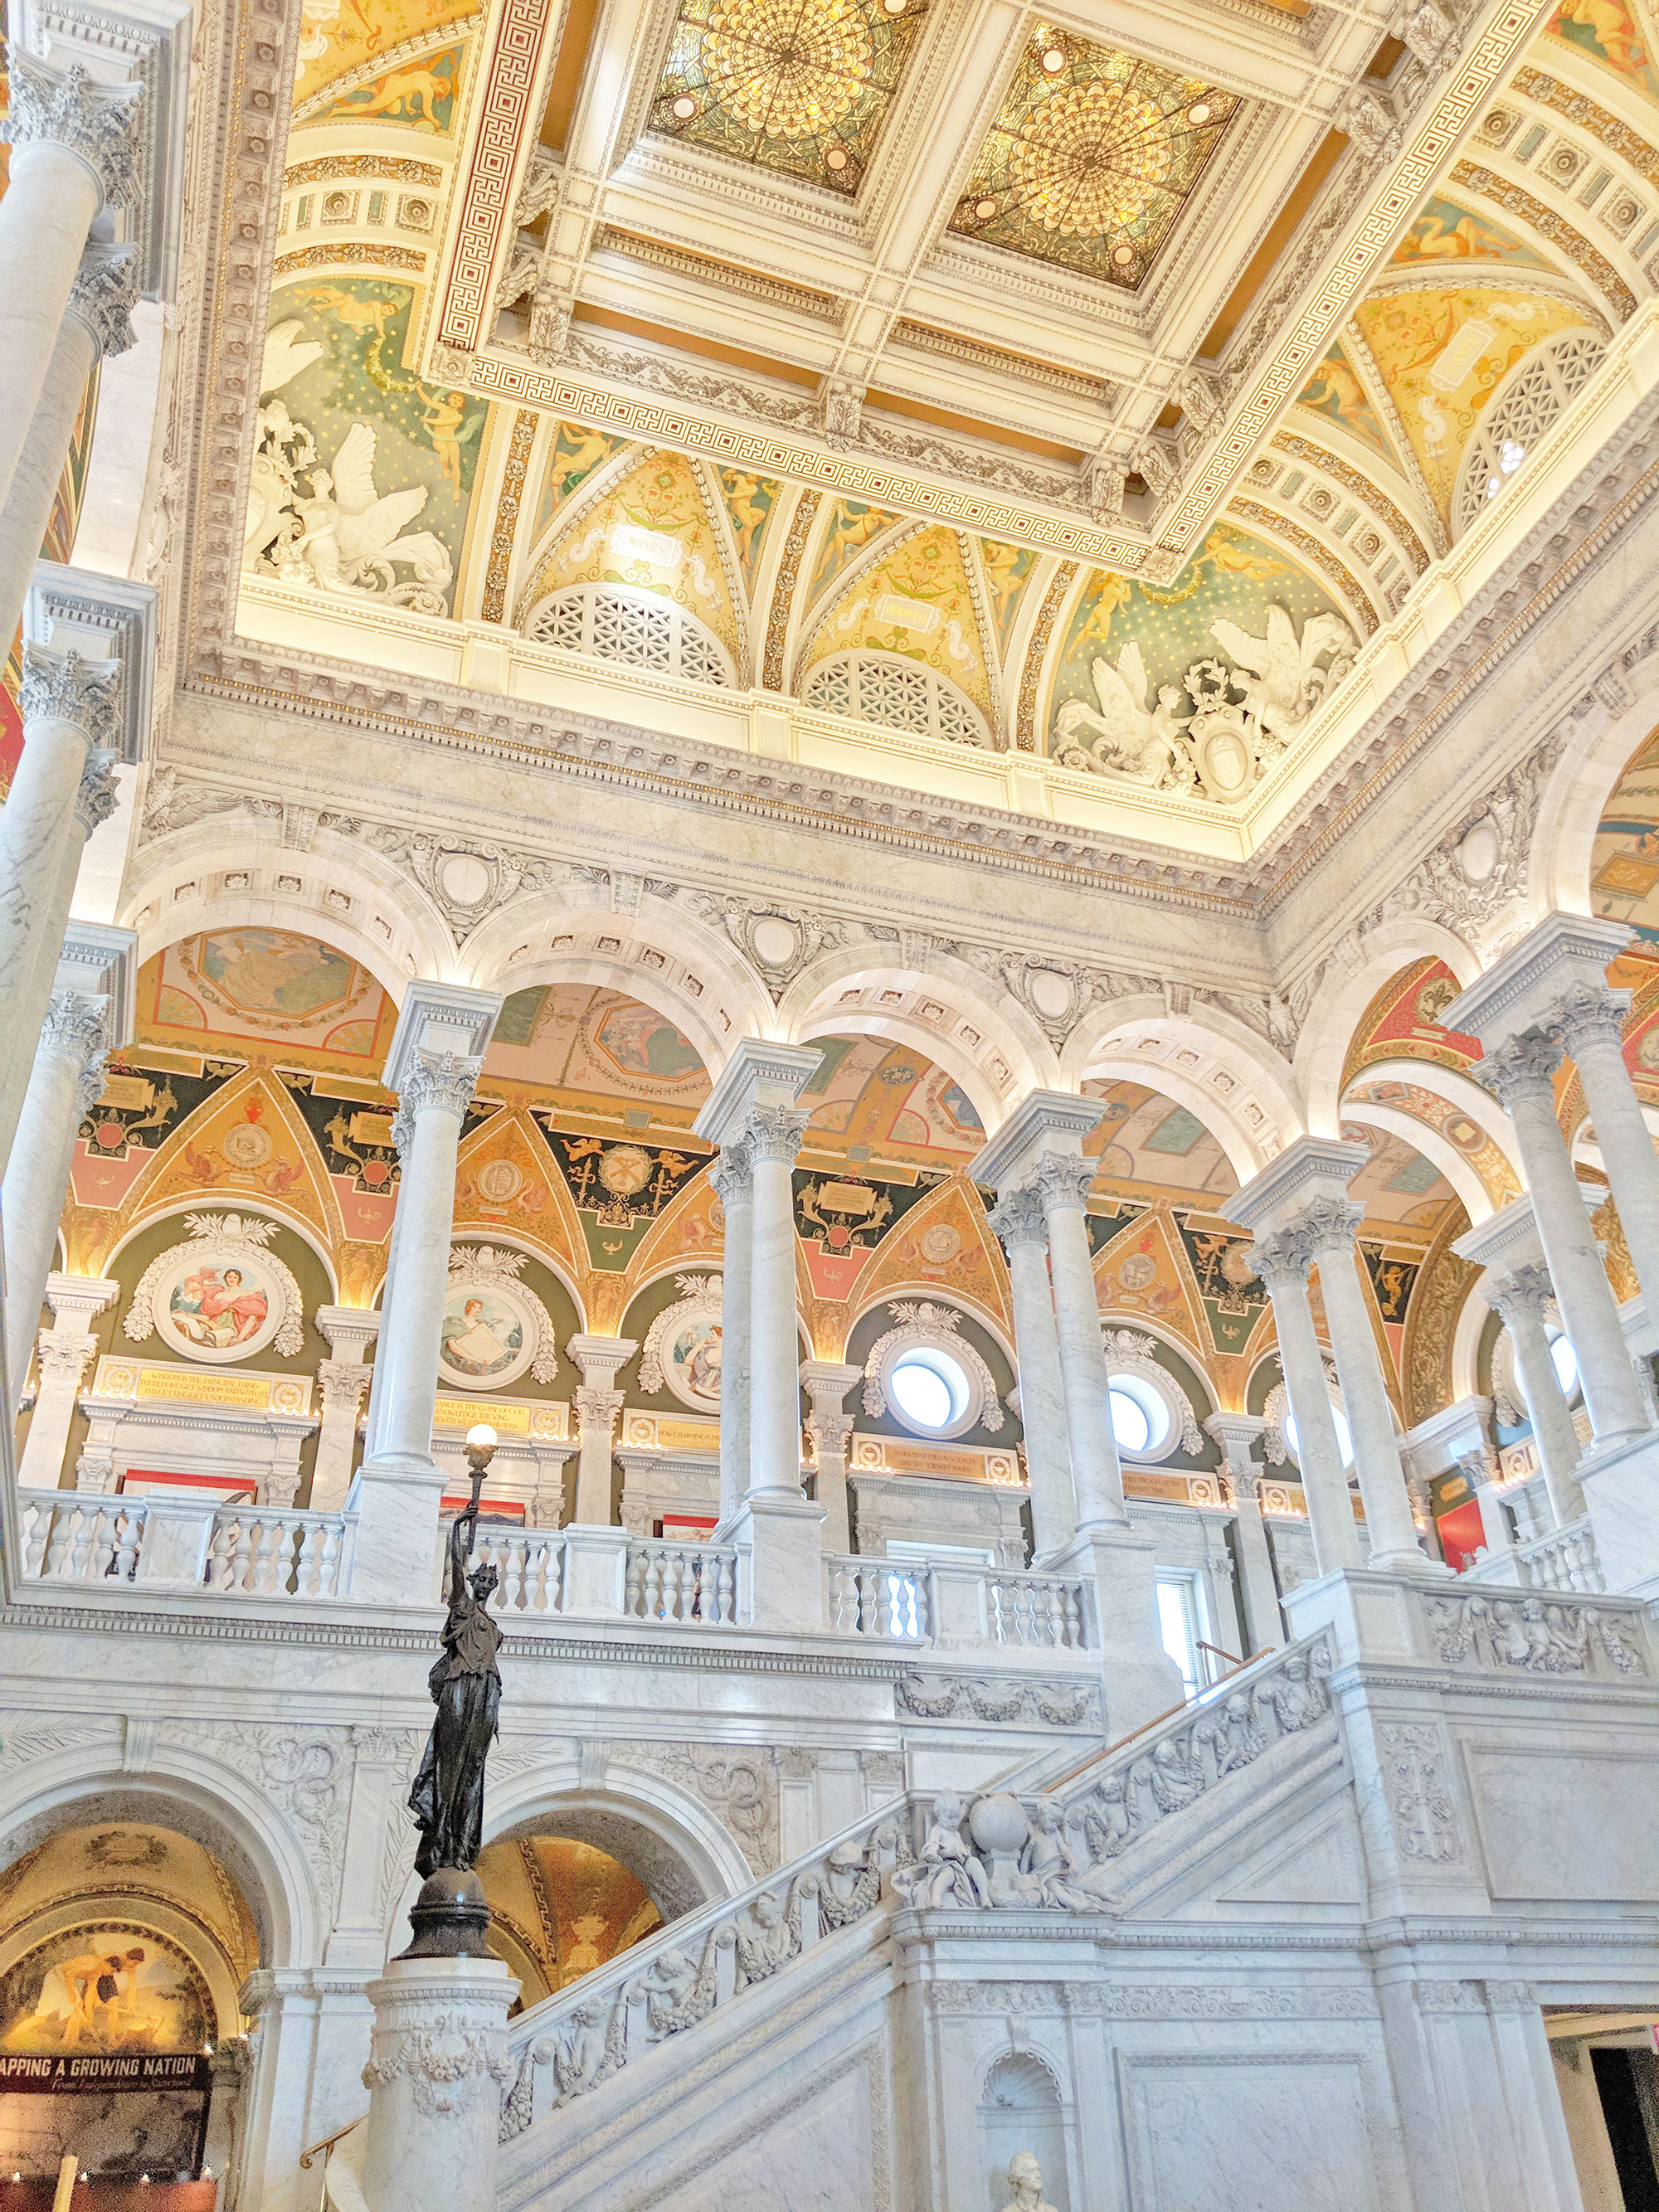 The atrium of the Library of Congress in Washington D.C.